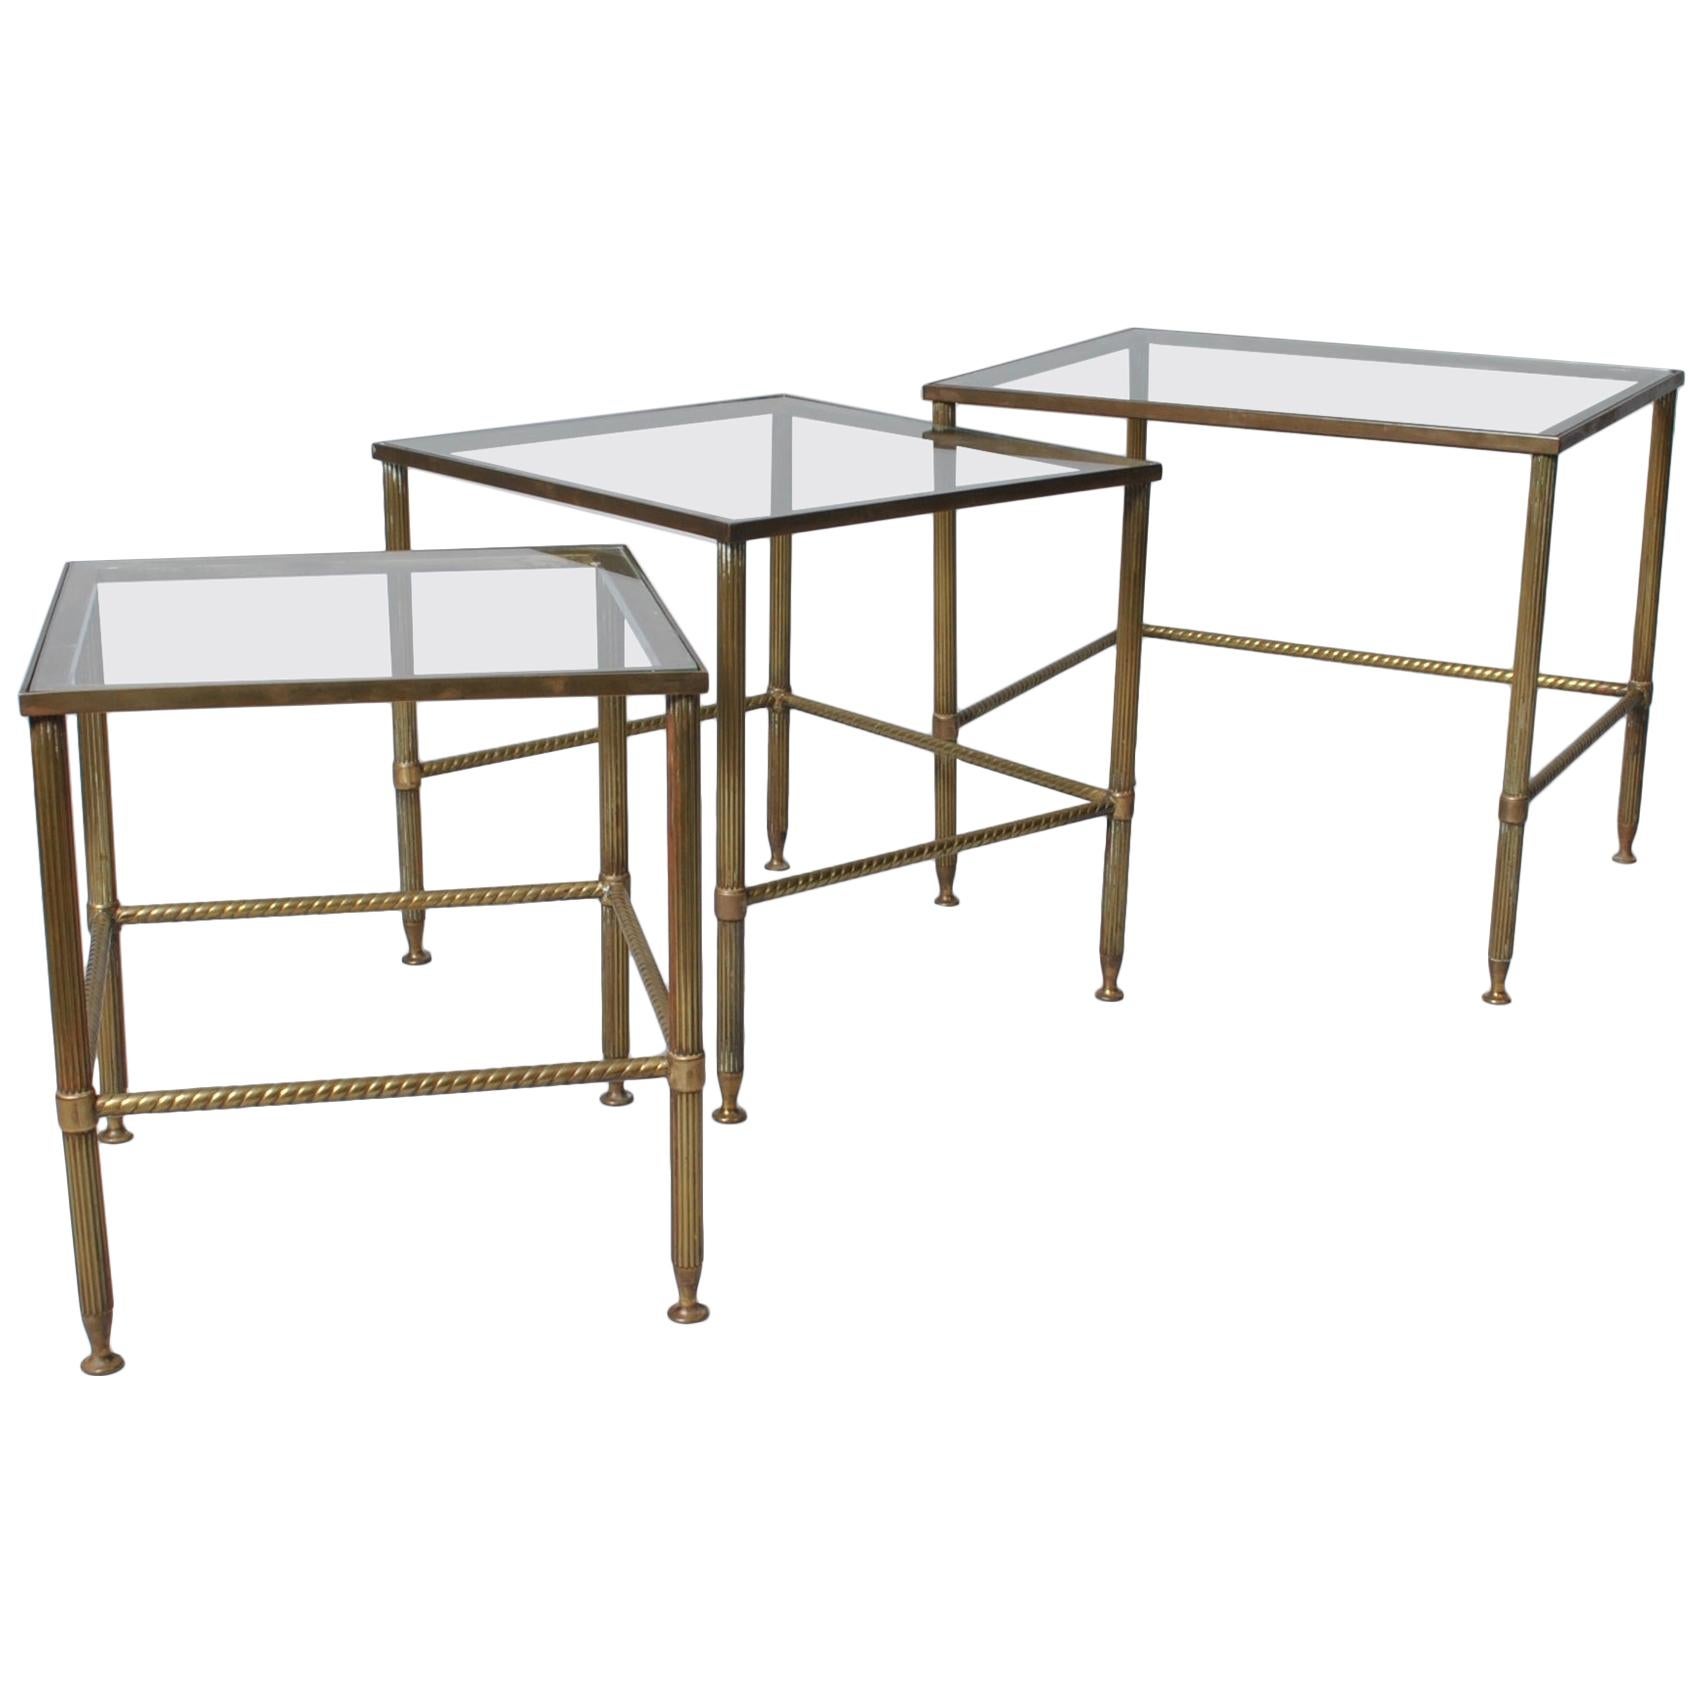 Midcentury French Nest Tables, Brass, 1950s